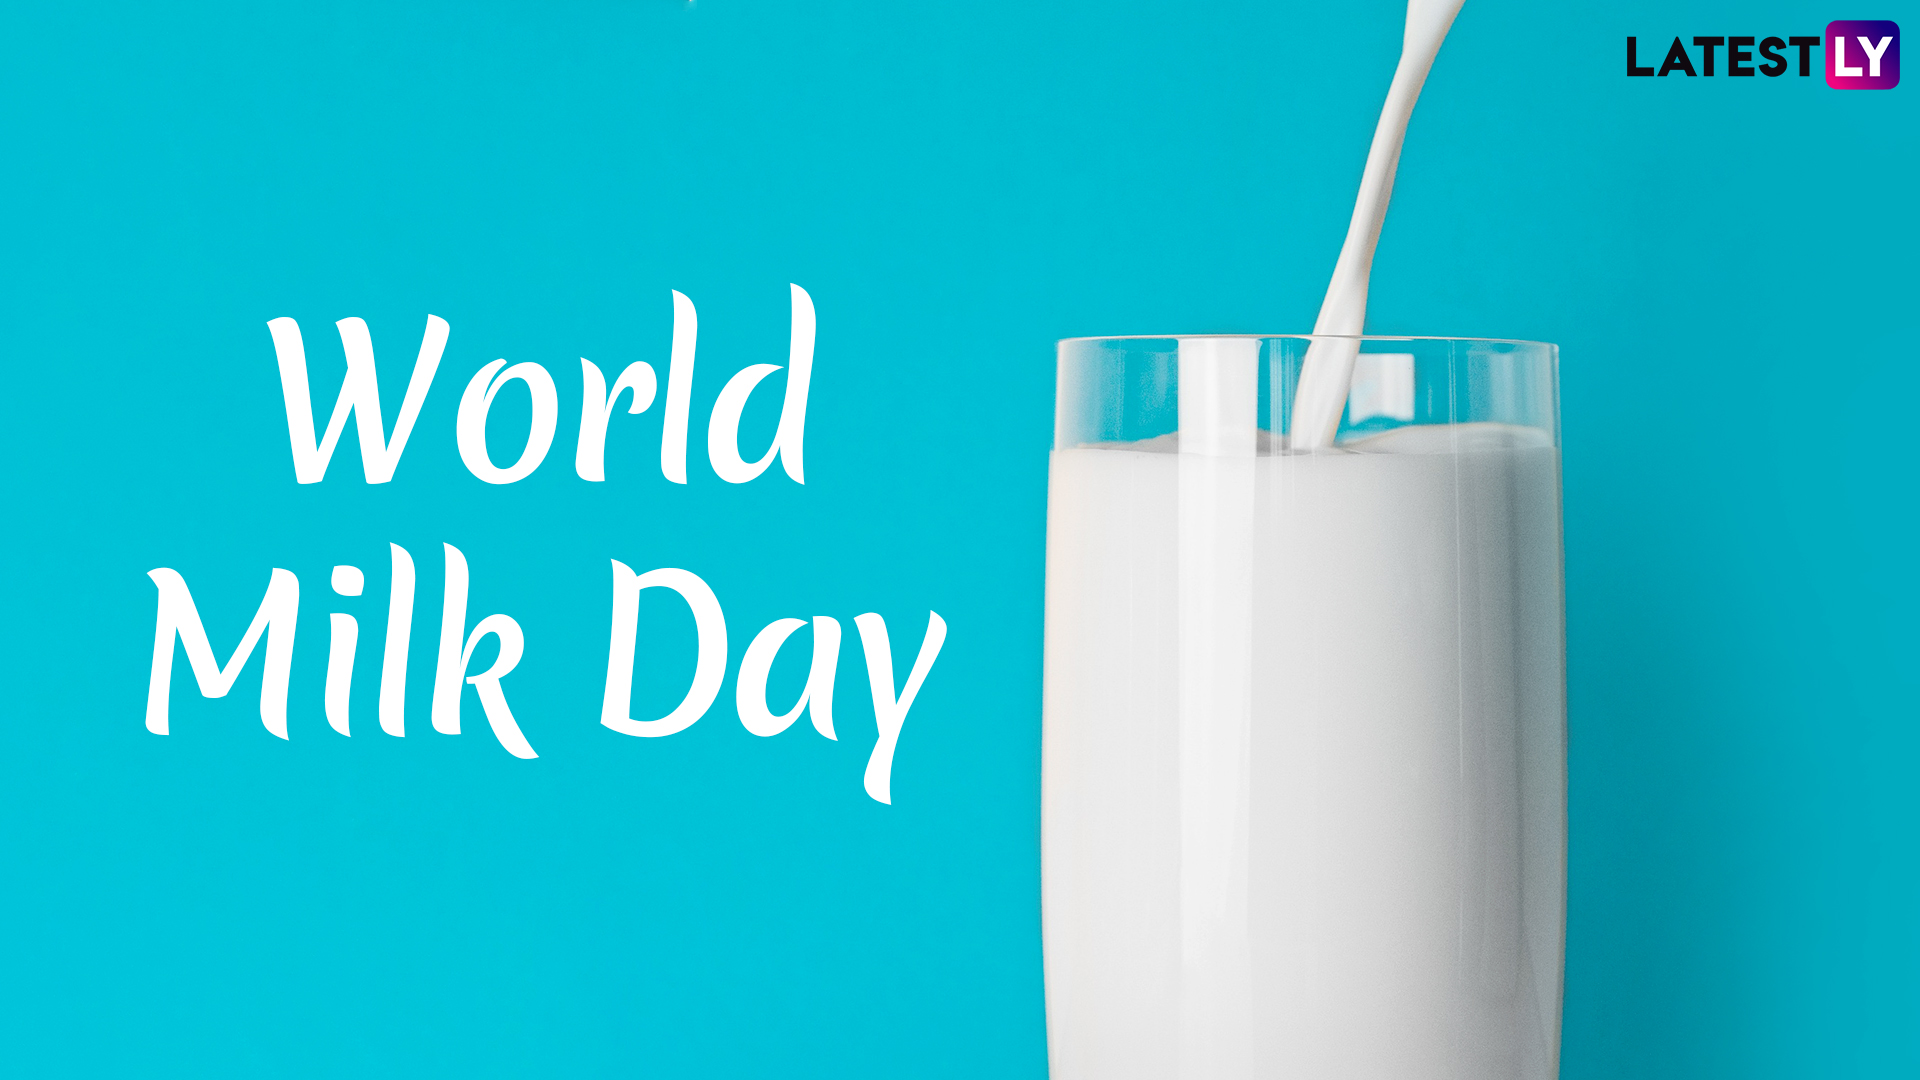 World Milk Day Quotes Hd Images Famous Sayings That Highlight The Importance Of Milk In Your Diet Latestly